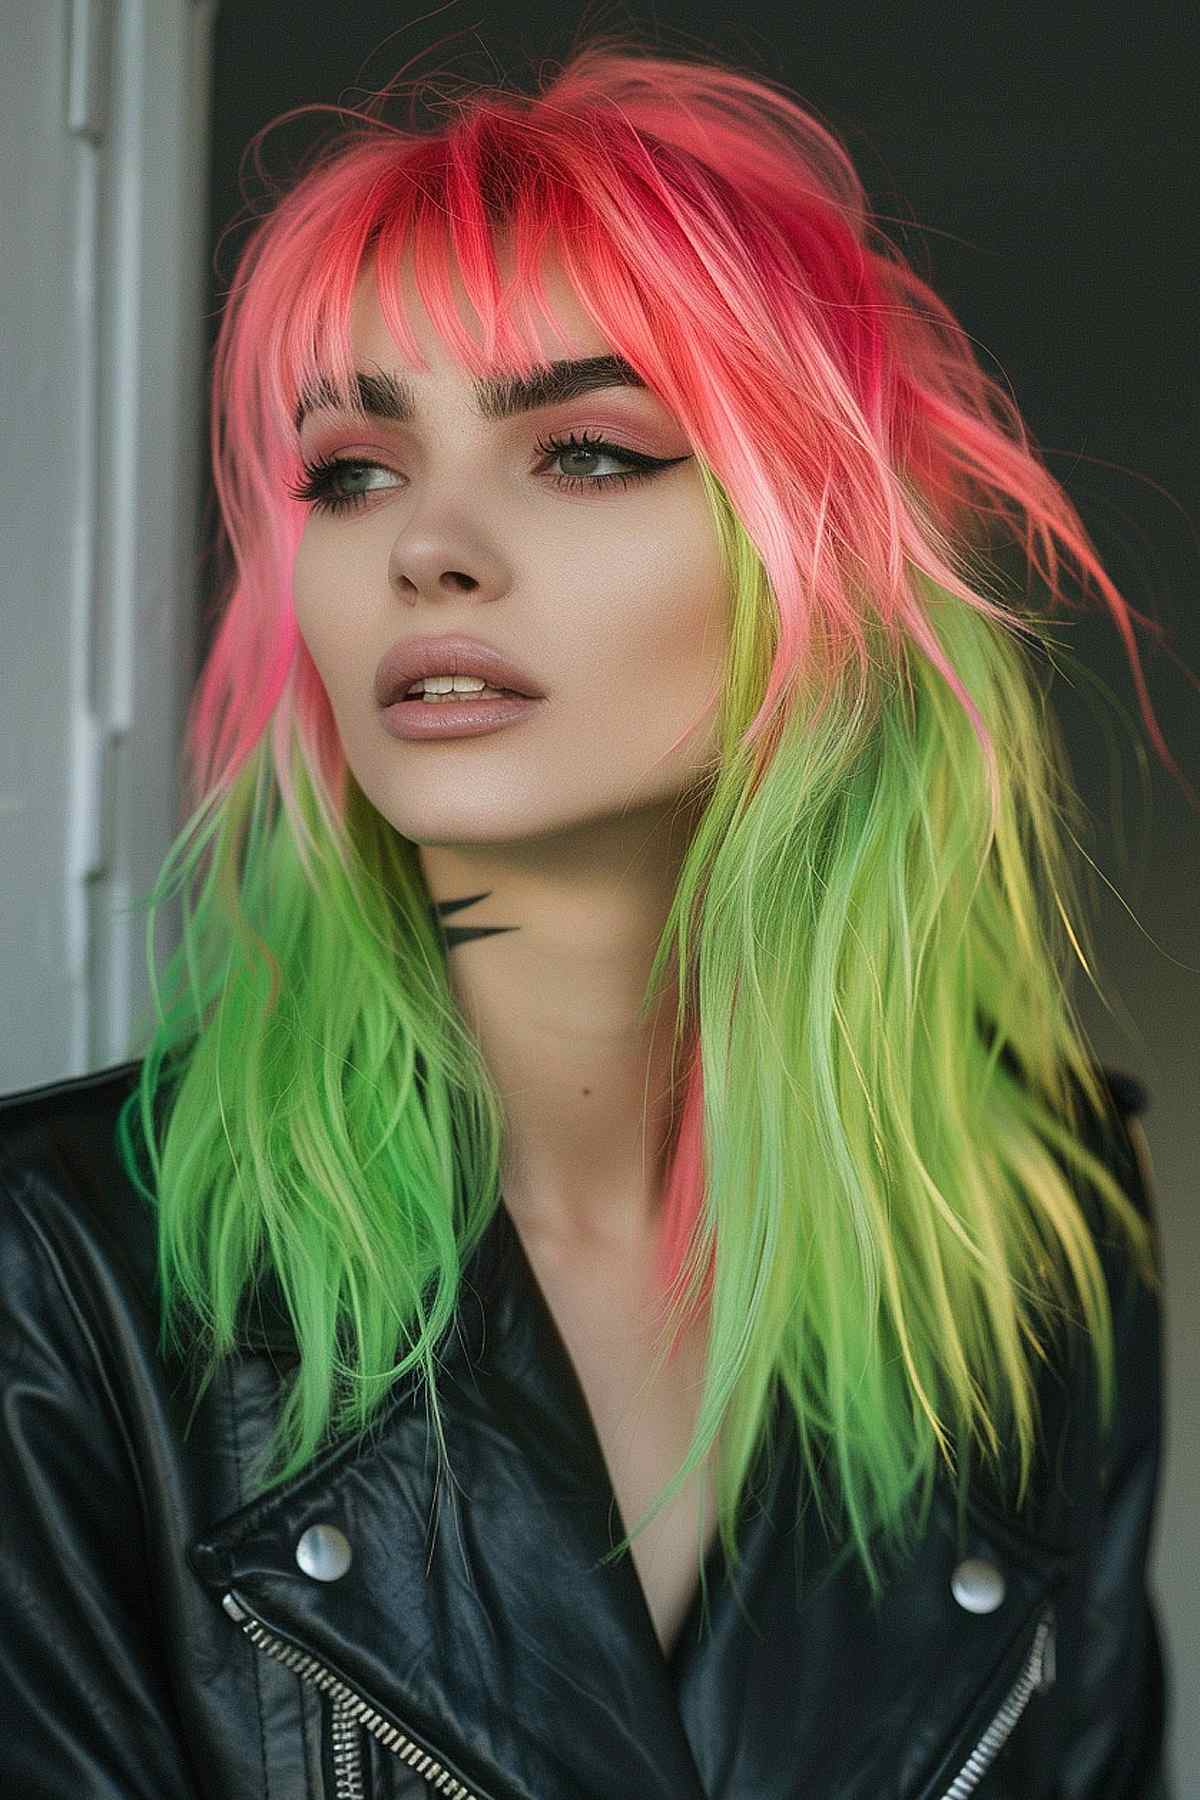 A young woman sporting an edgy shag haircut with vibrant pink on top transitioning into bright green at the ends, styled in messy layers. 